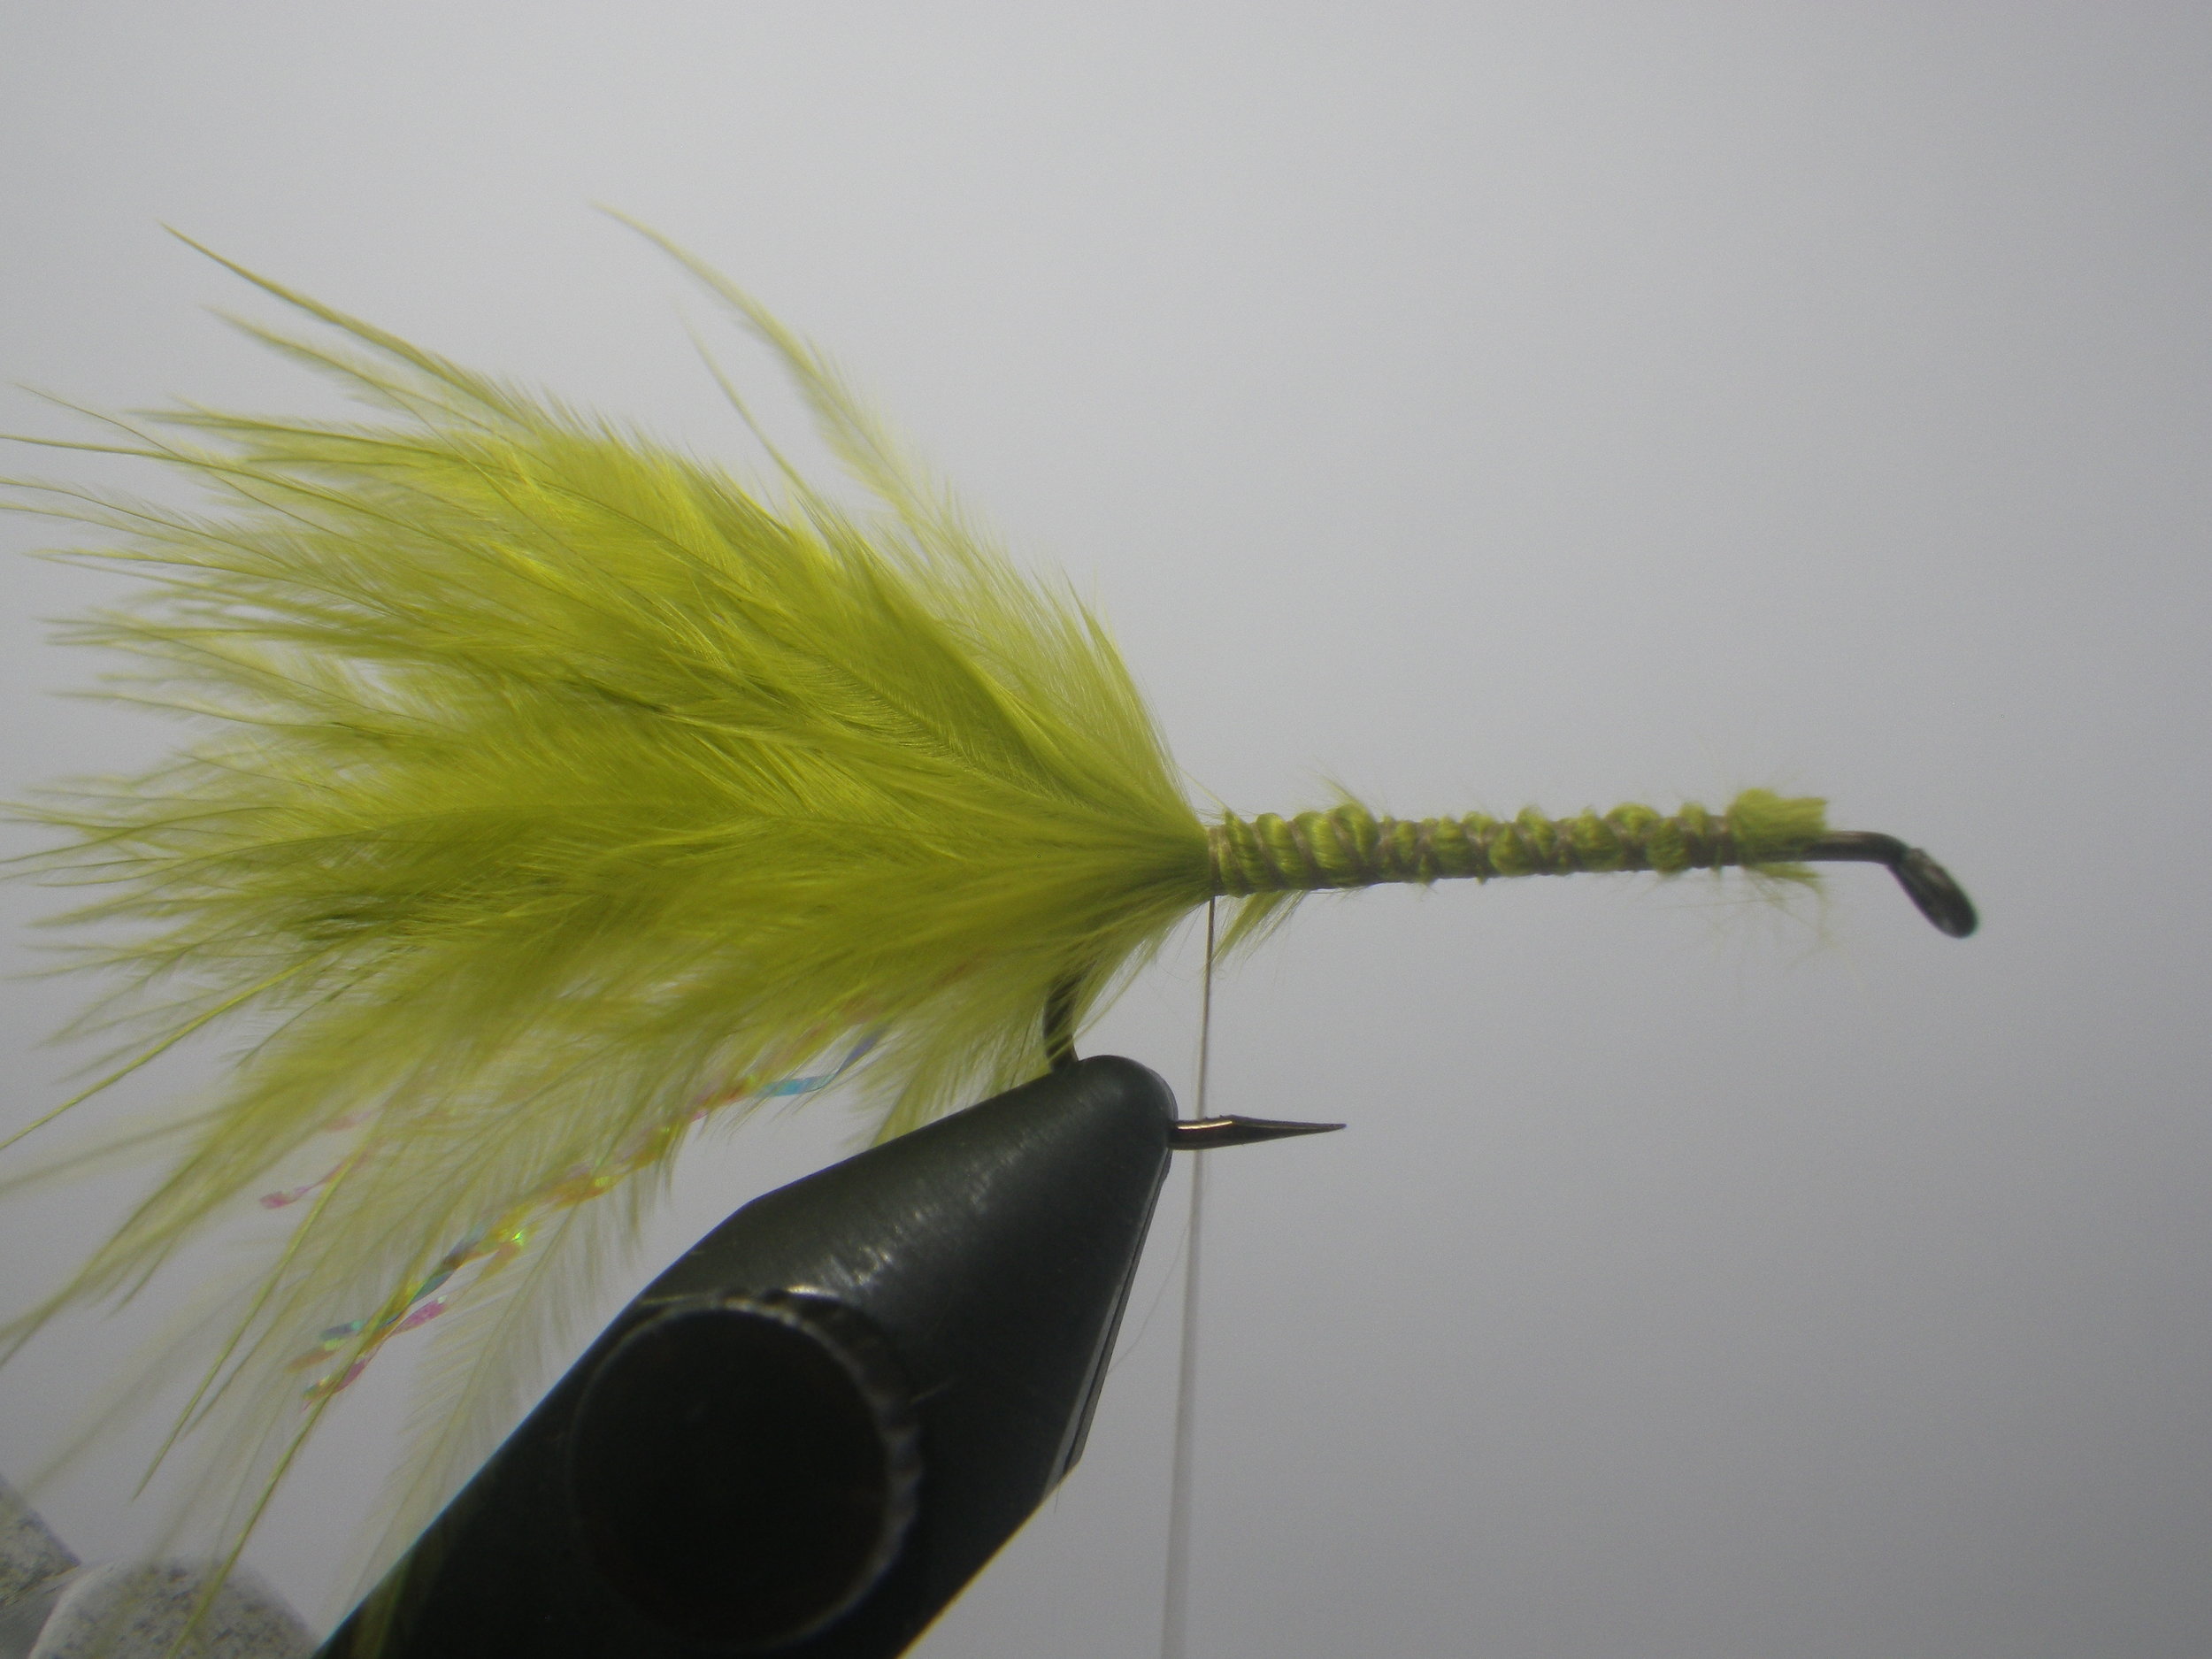 Details about   2pcs Wooly Bugger Fly Fishing Fliegen weiß gelb